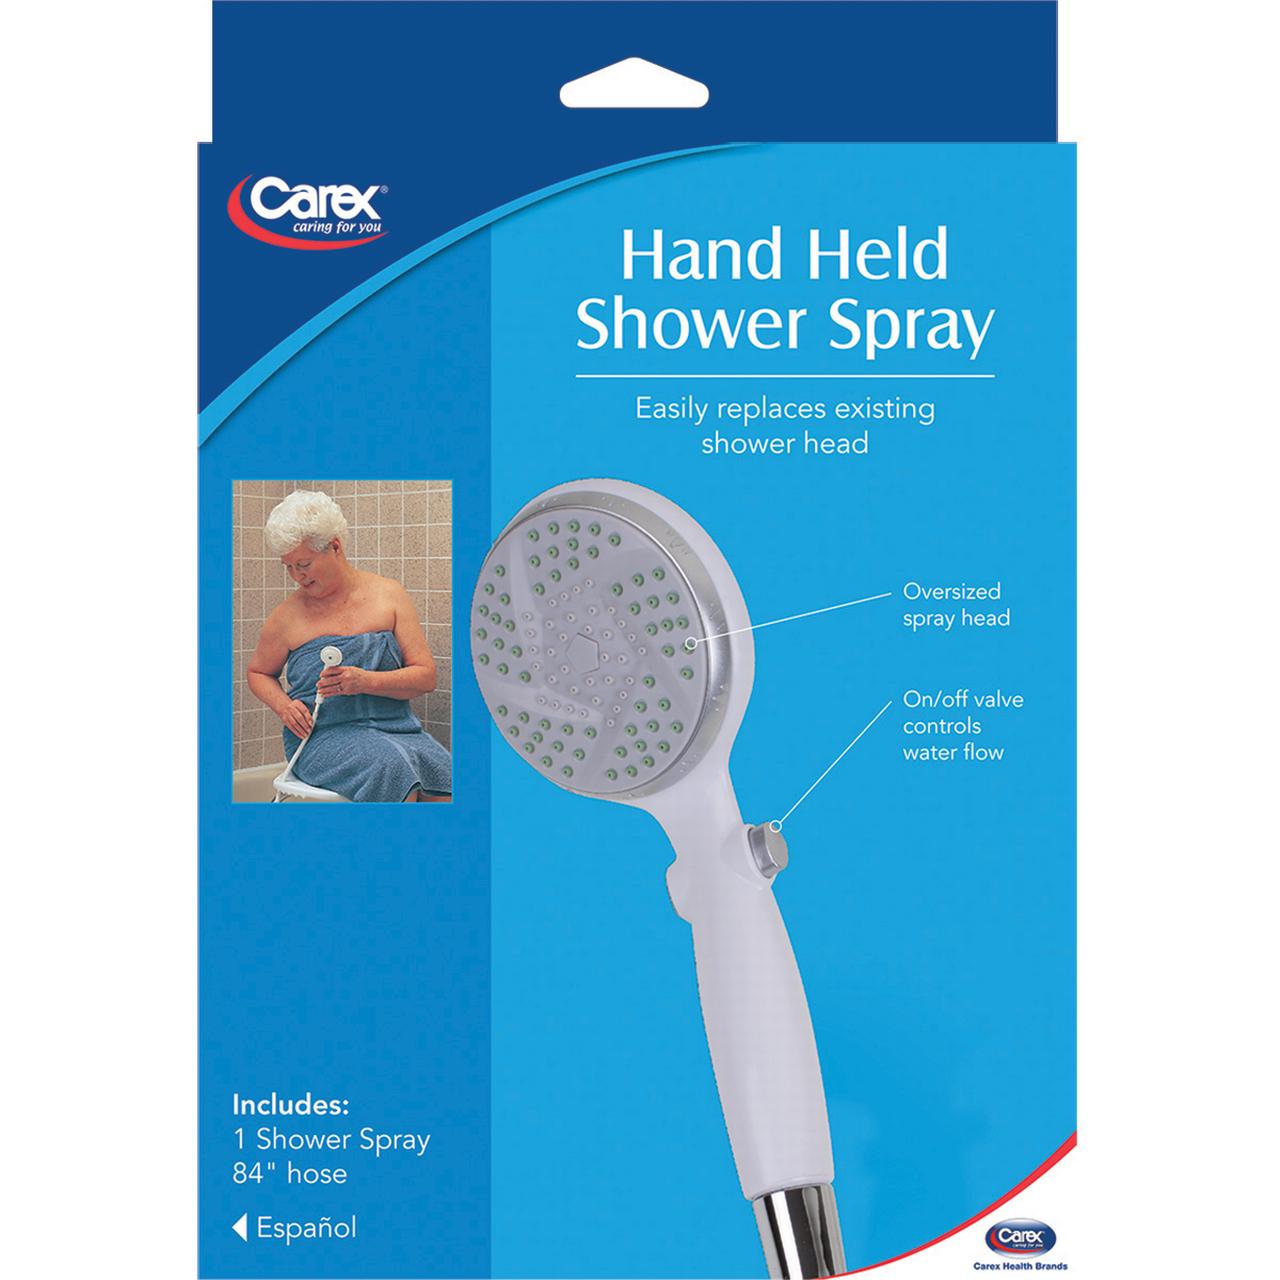 Carex Handheld Showerhead with Extra-Long 84" Flexible Hose and Pause Function, Watersense Certified - image 2 of 7